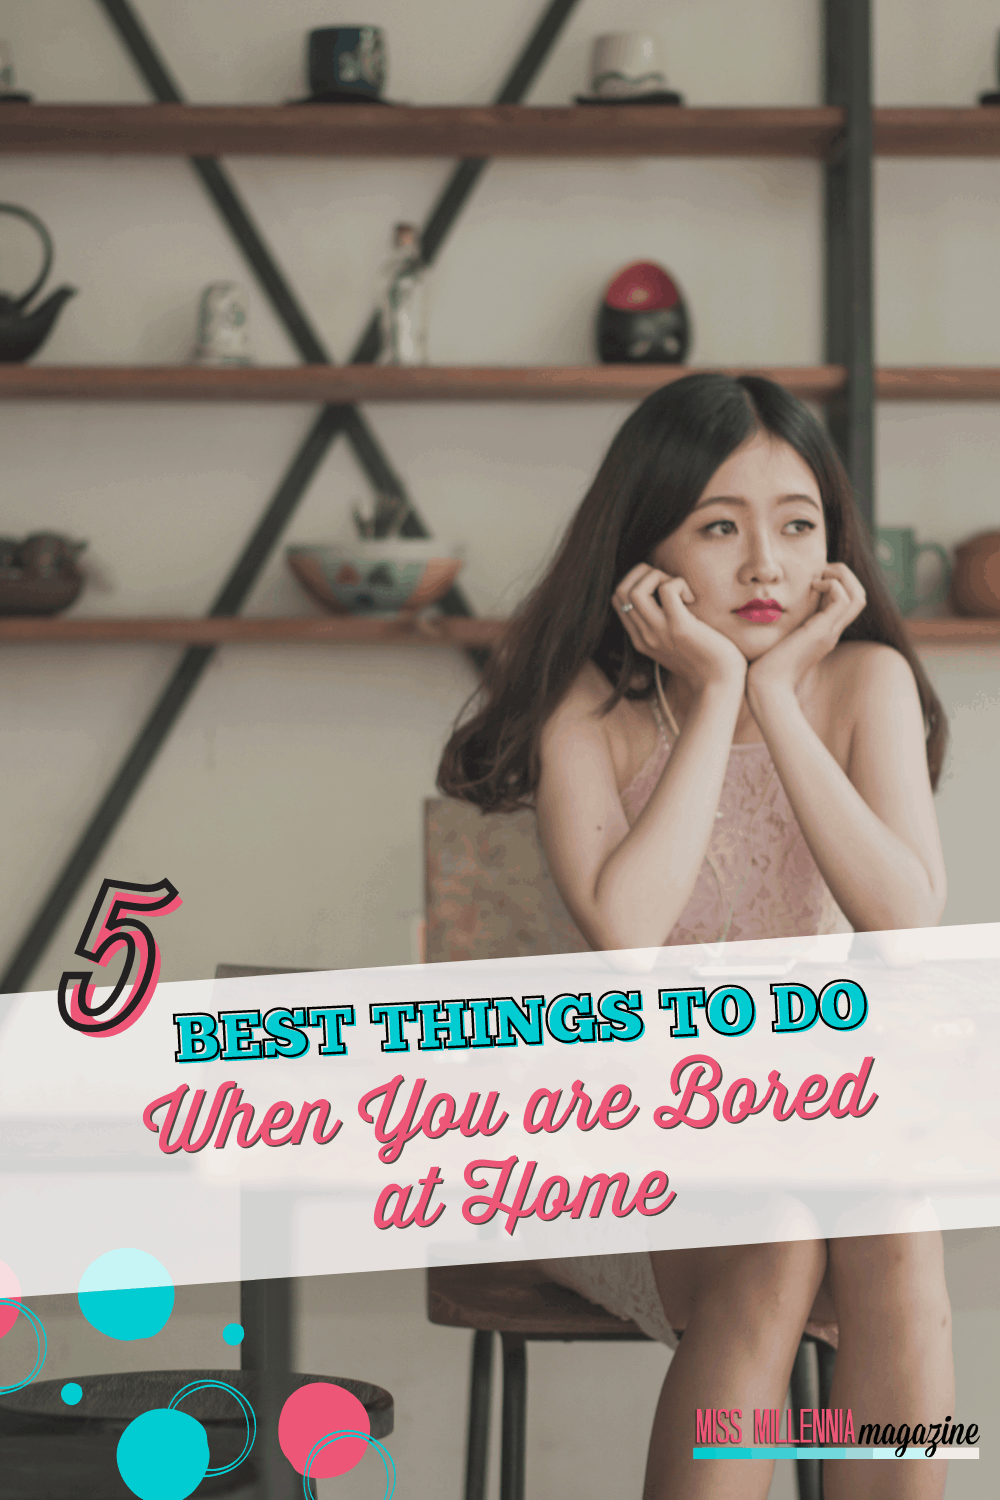 5 Best Things to Do When You are Bored at Home